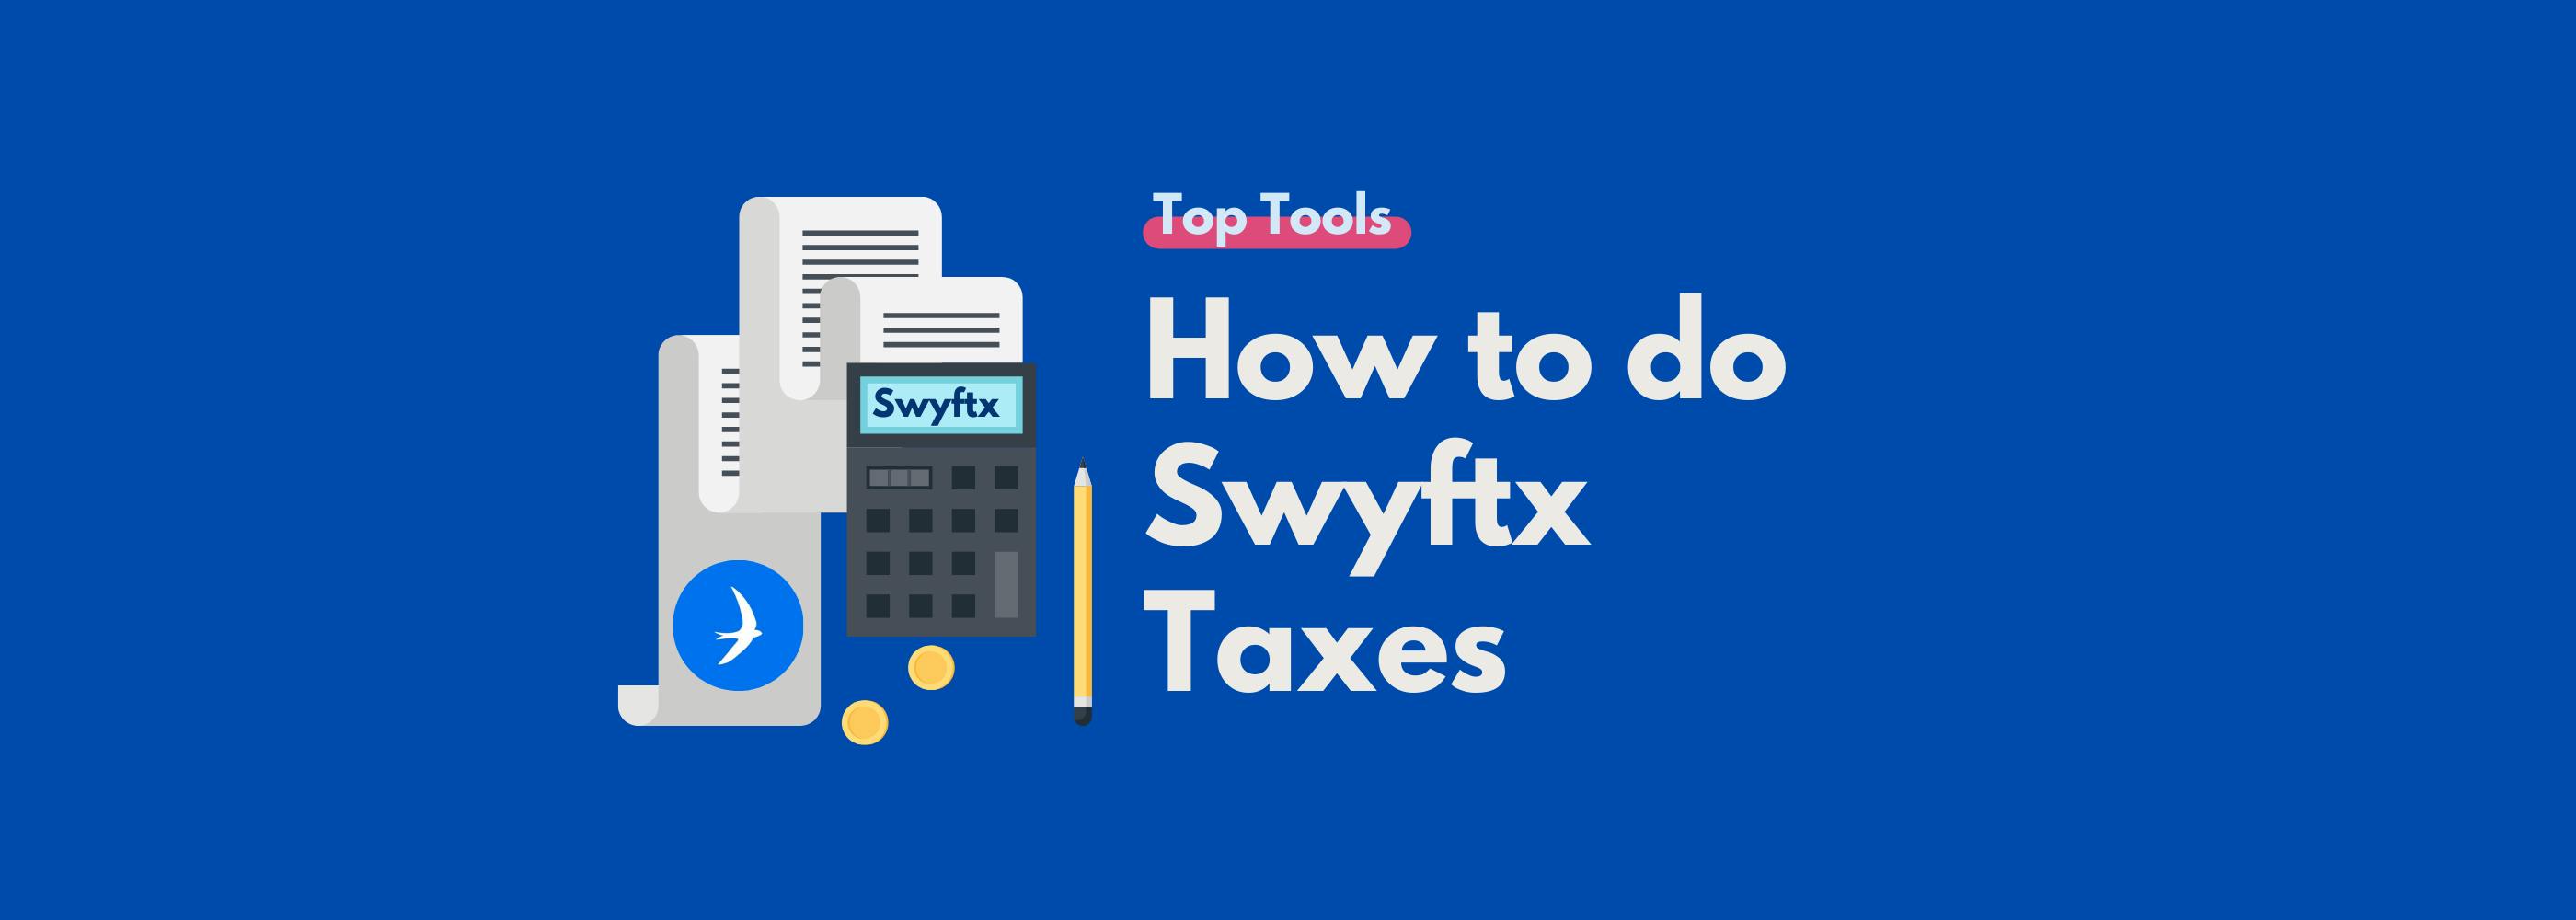 Swyftx tax reports and statements guide